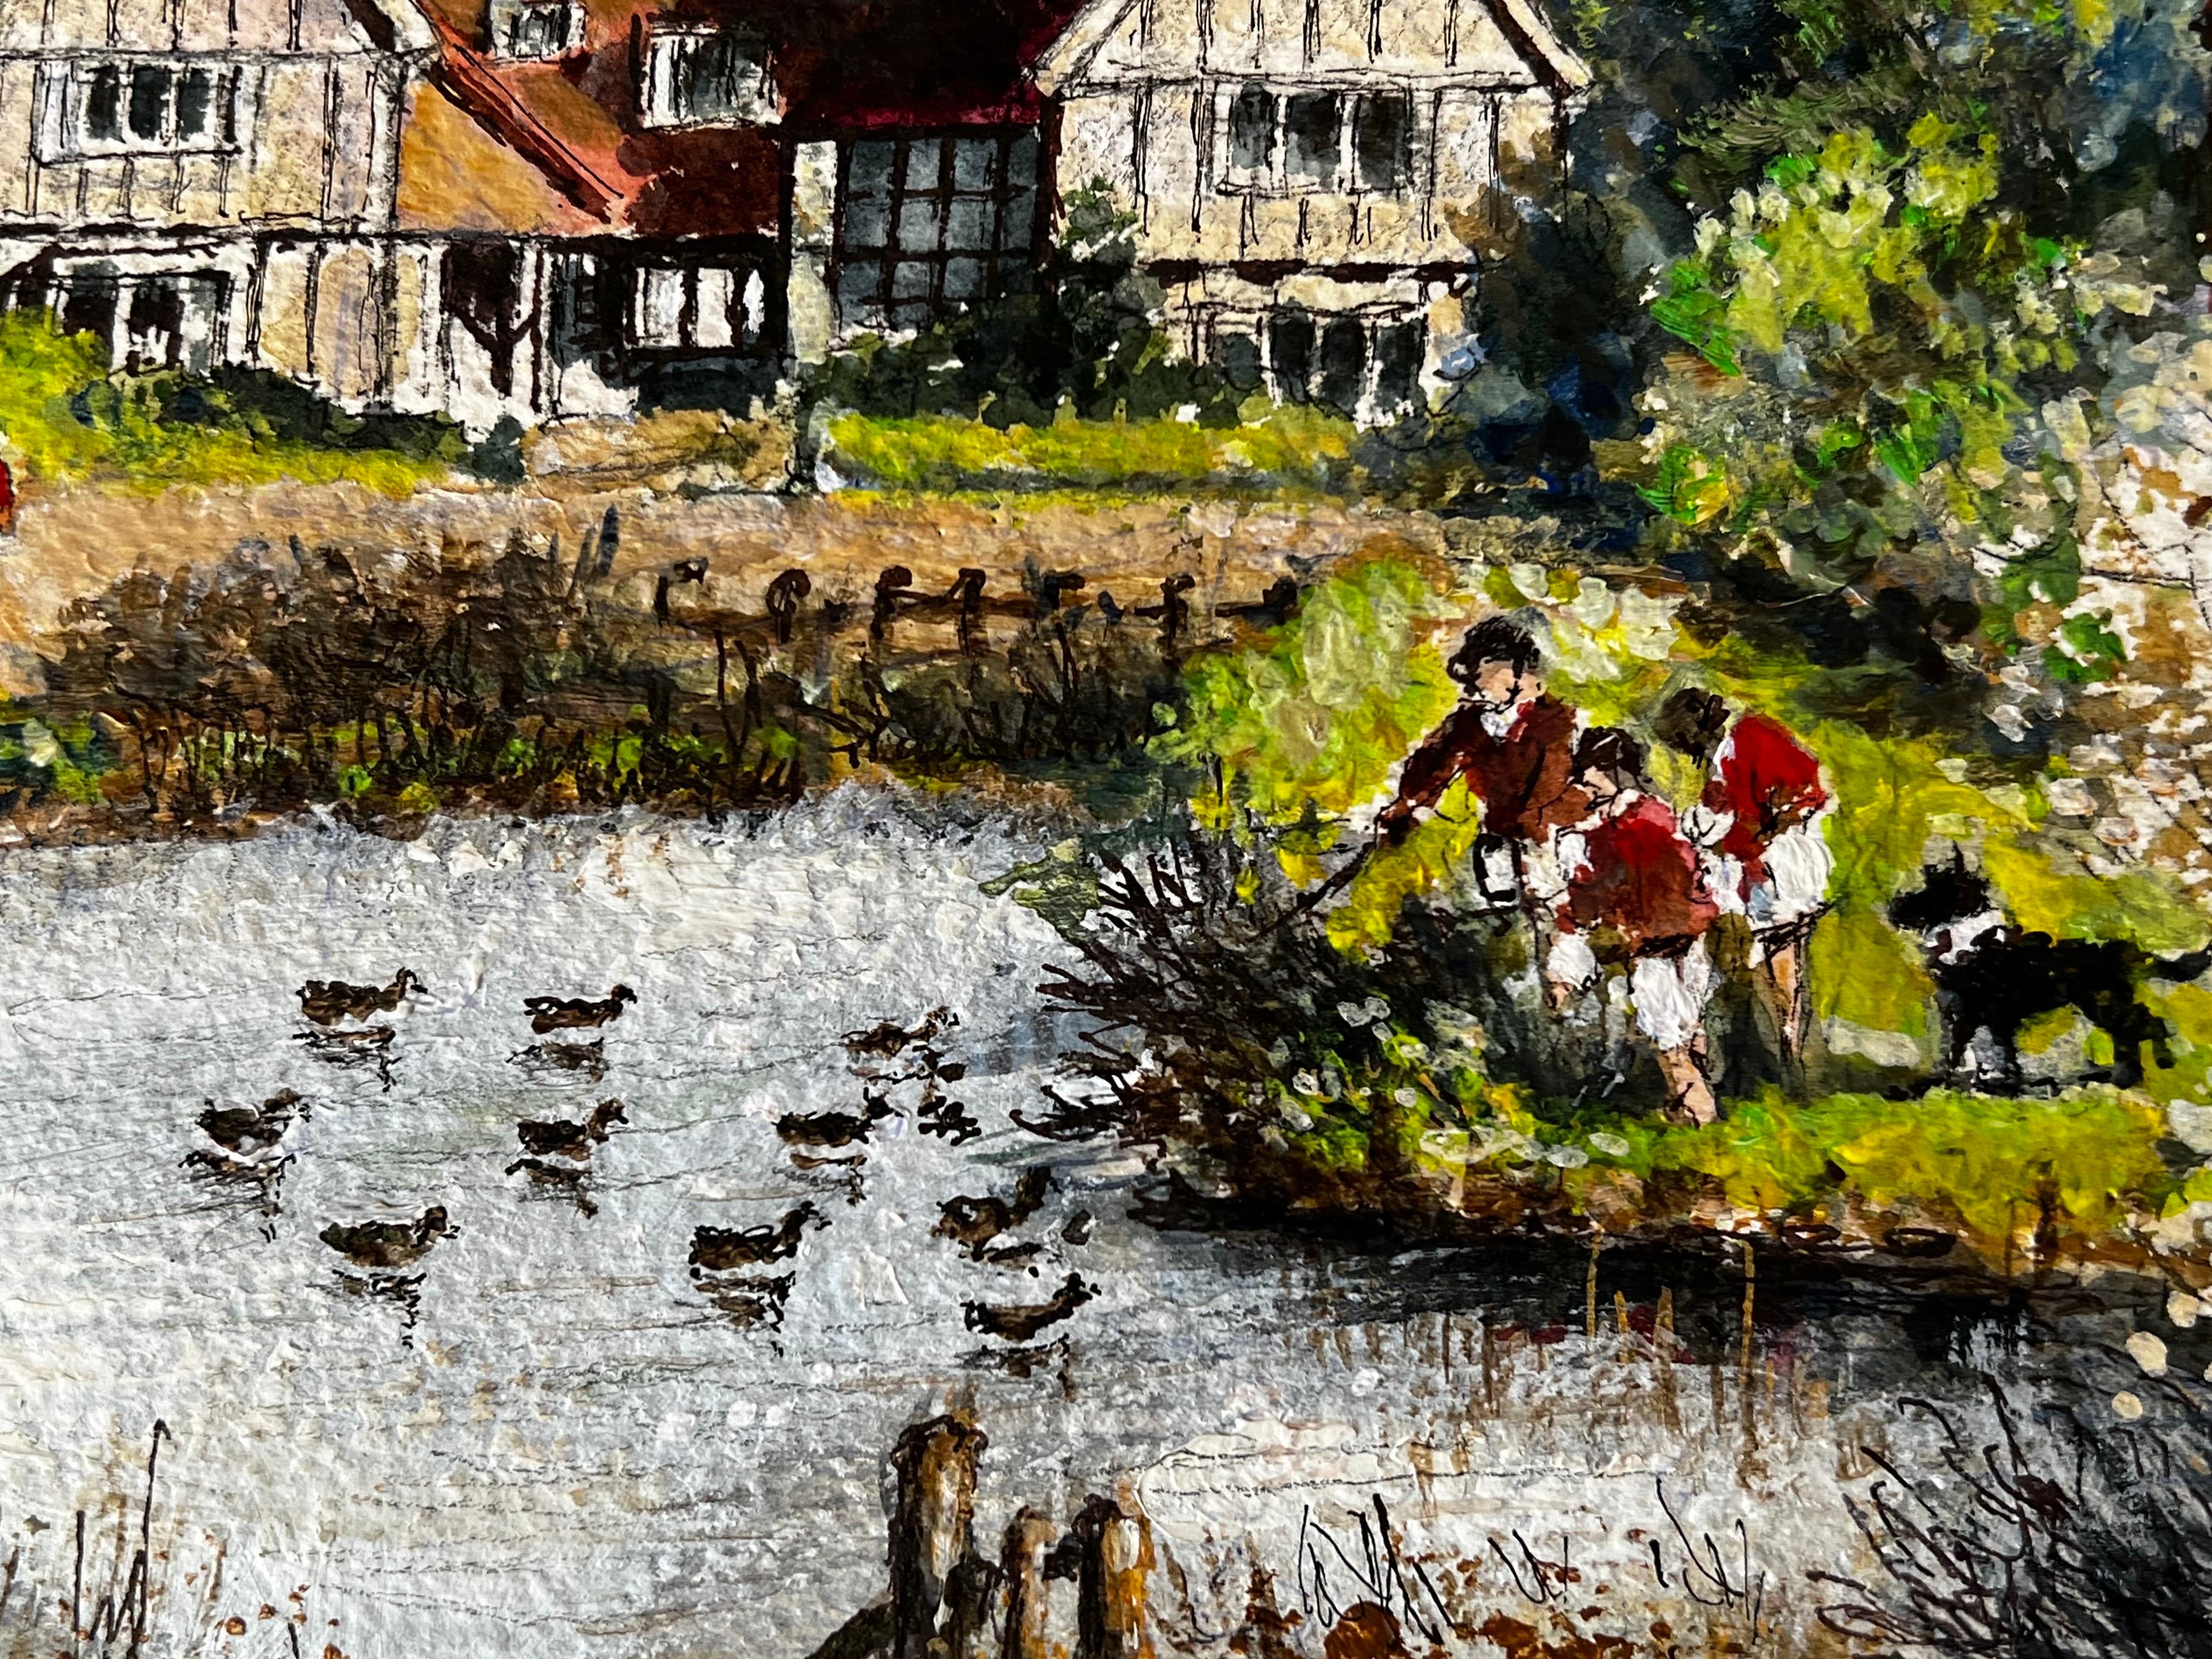 The Huntsman Feeding The Ducks In A Peaceful Kentish Town Landscape - Victorian Painting by Norman A Olley